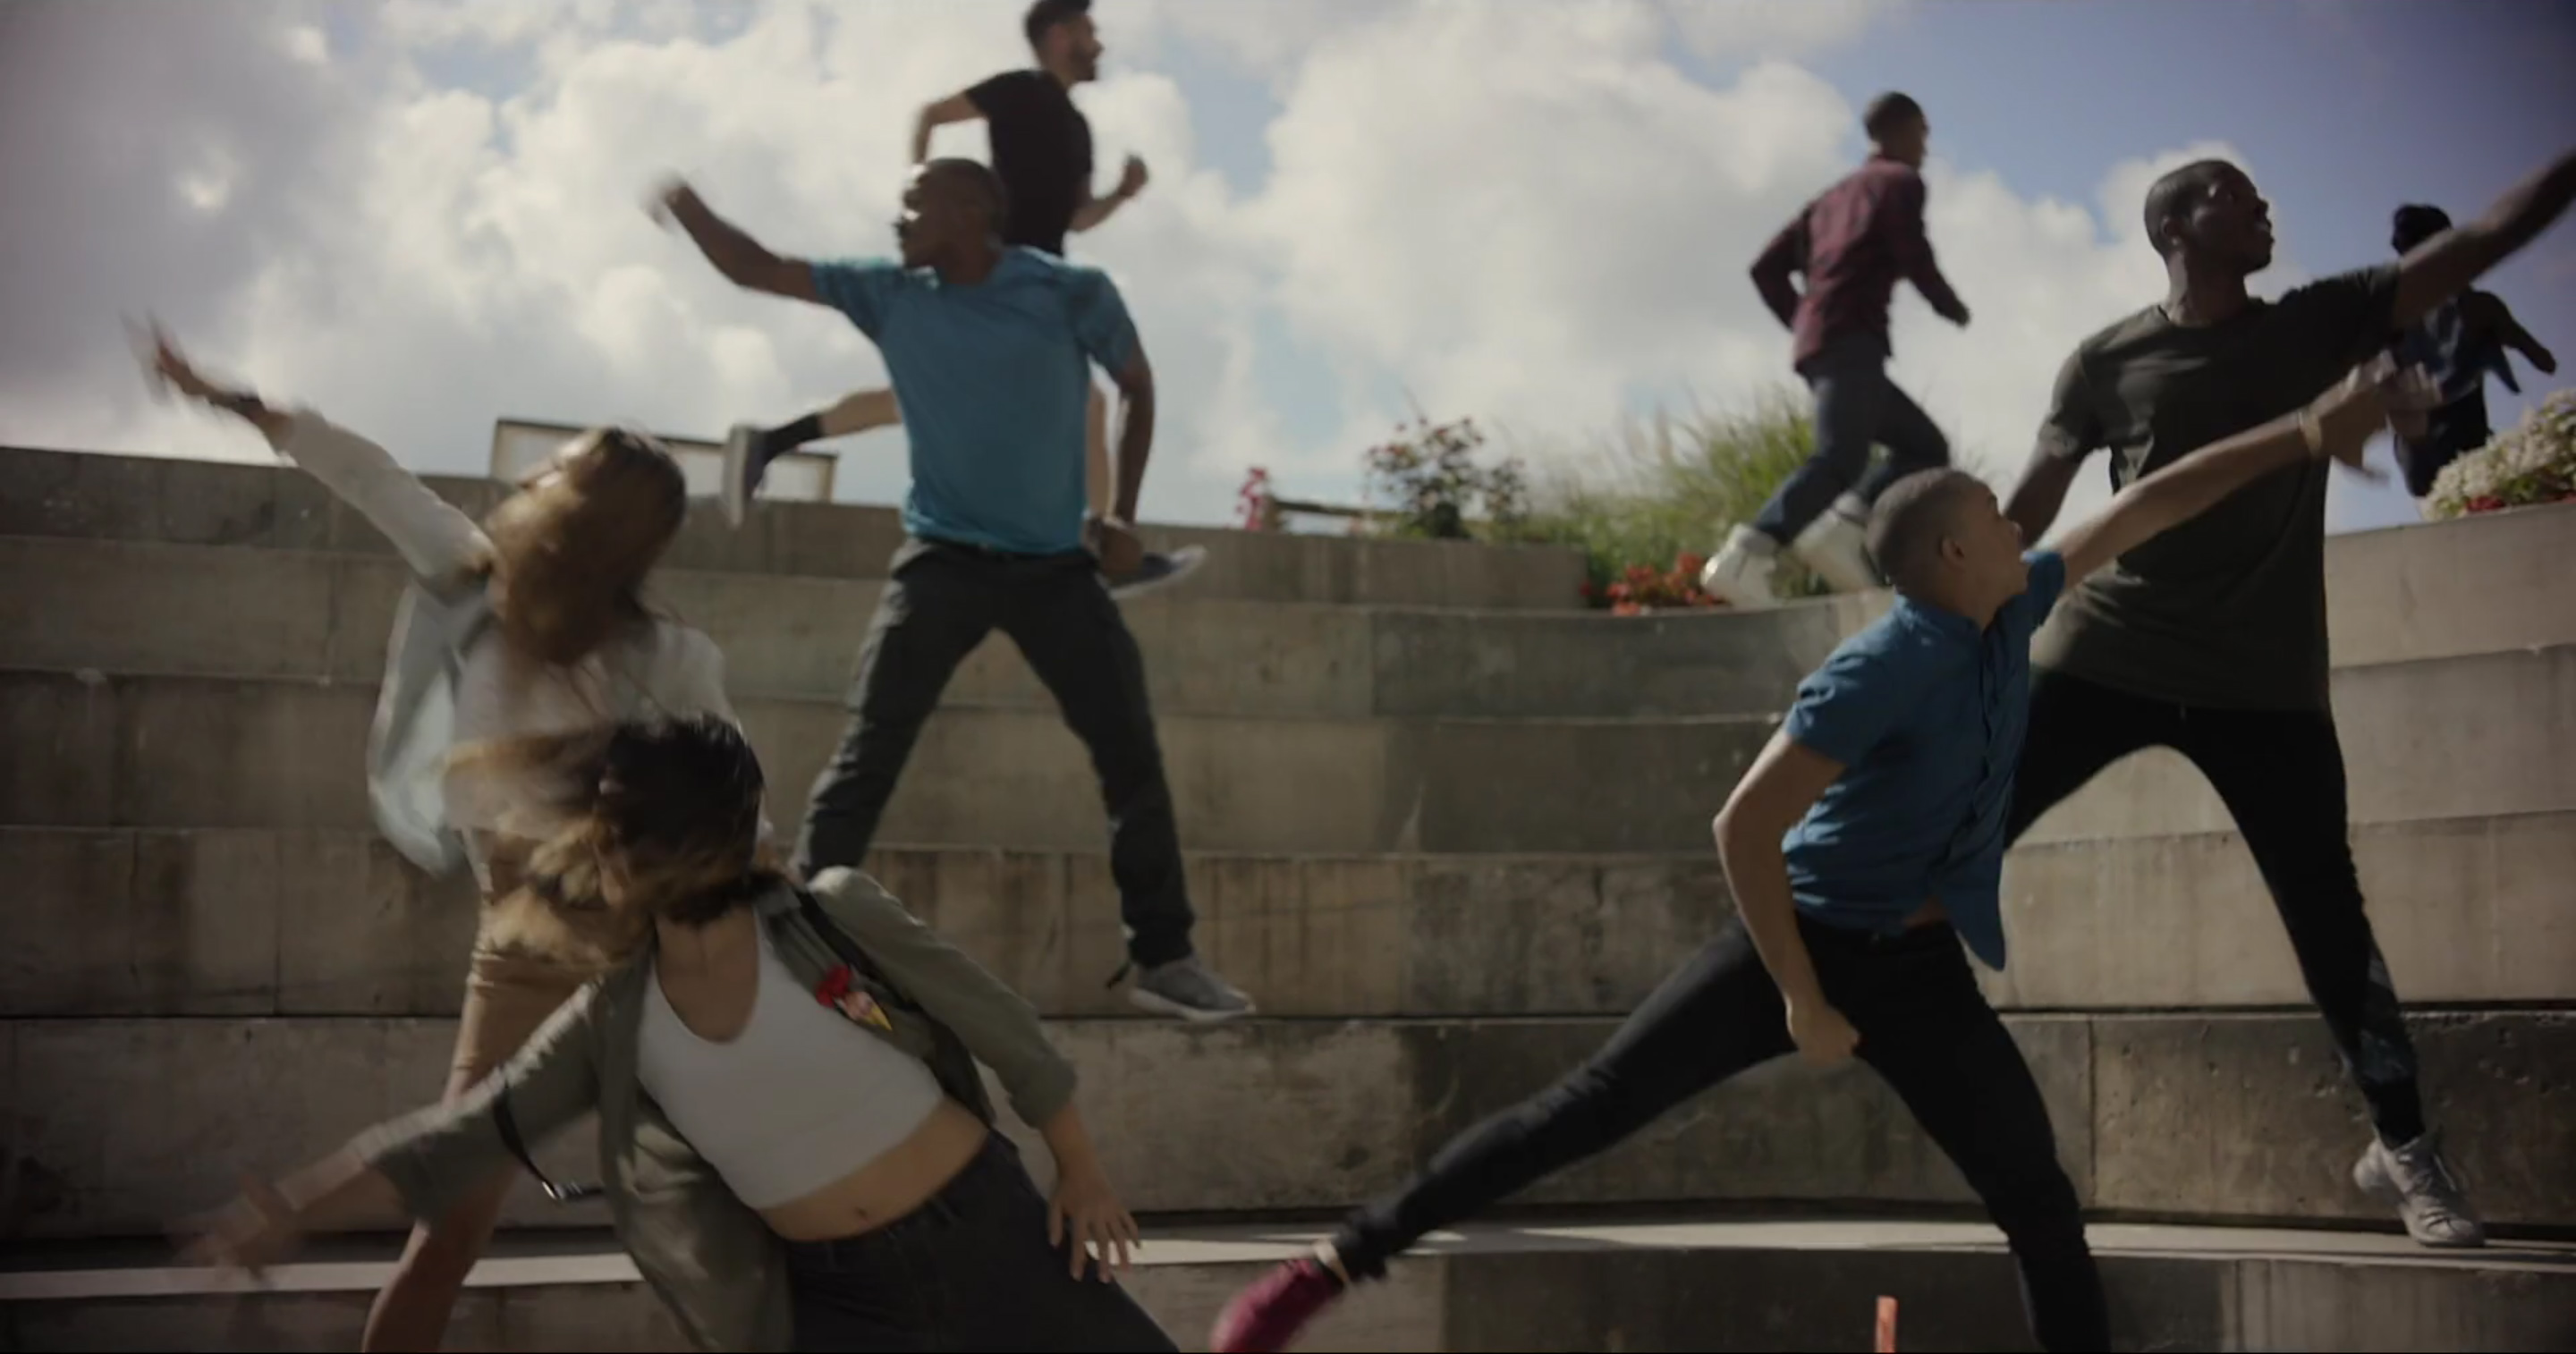 Three stills from The Mill’s teaser video for Vessel. Dancers dressed as typical New Yorkers dance in the morning sun on a set of gray stairs. Together, their bodies form the latticework in shadow of <i>Vessel</i>.